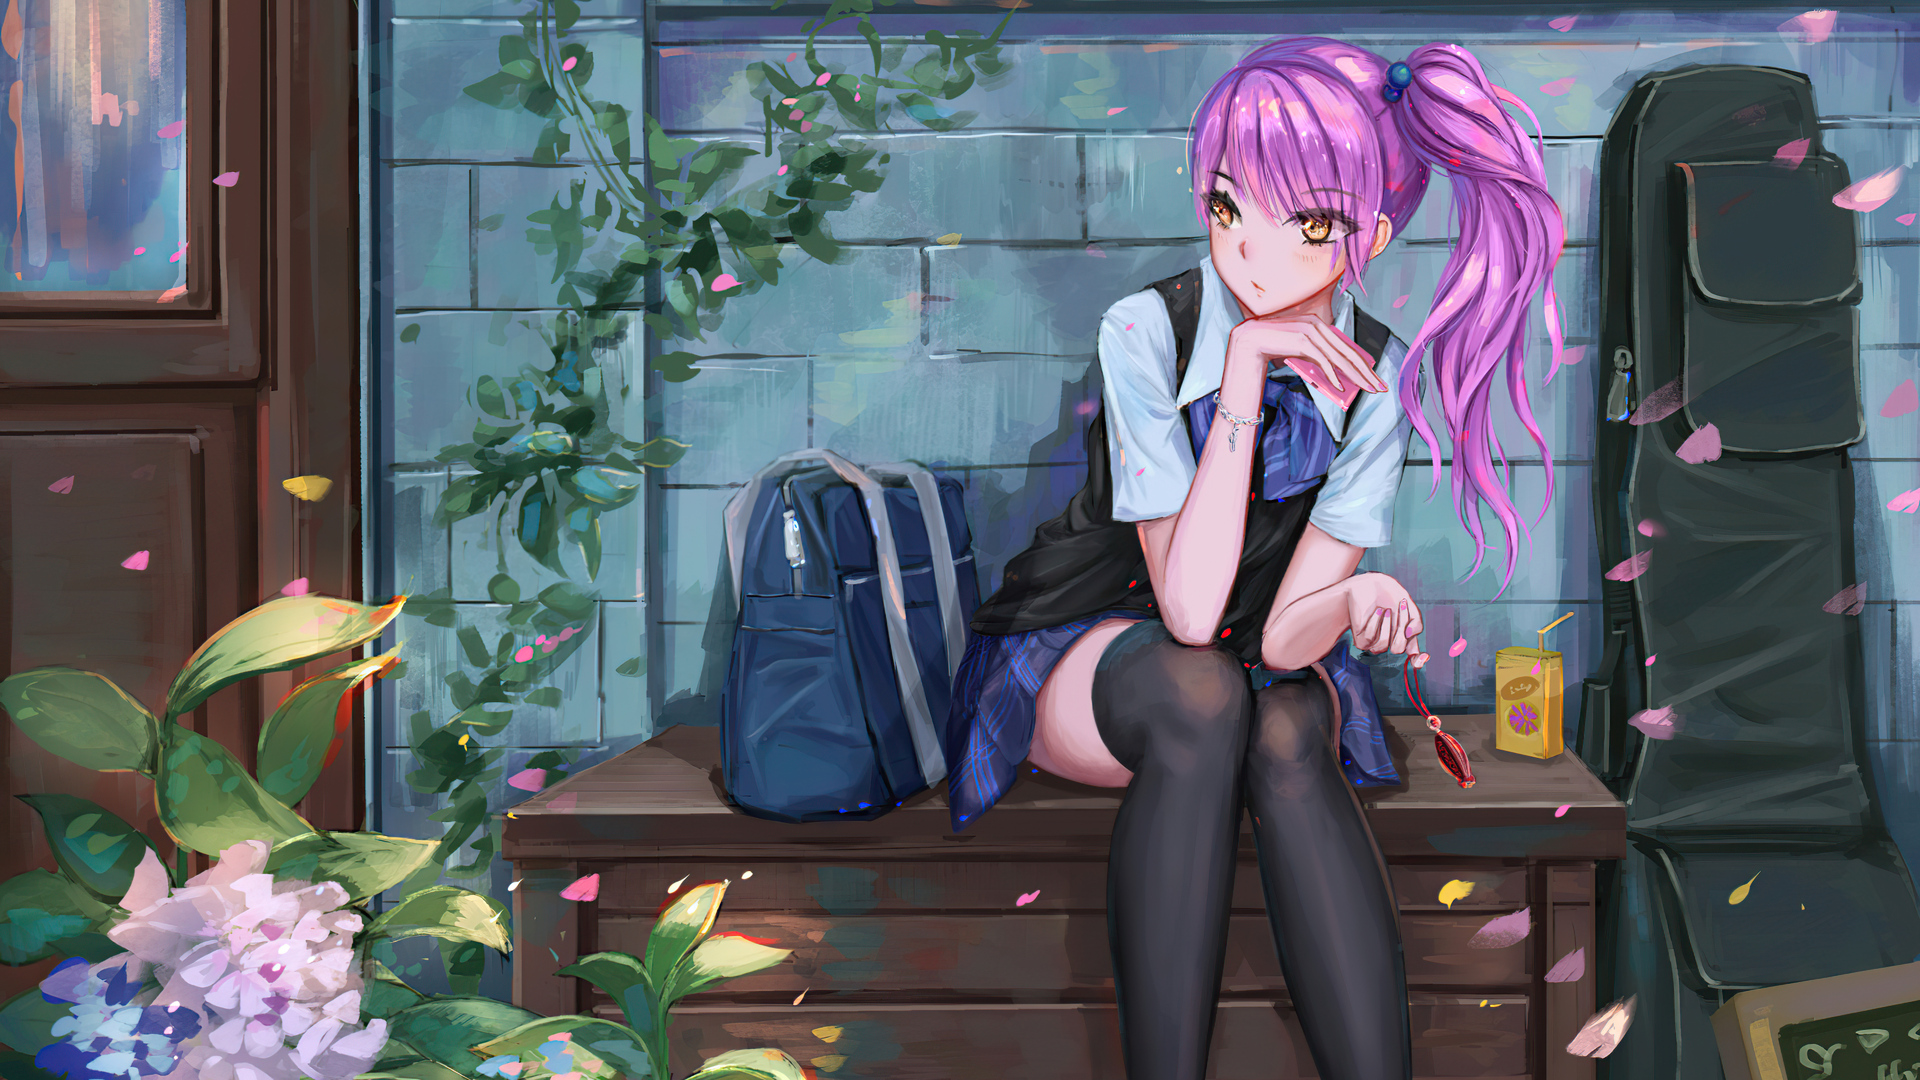 1920x1080 Cute Anime School Girl Pink Hairs Sitting On Bench 8k Laptop Full  HD 1080P HD 4k Wallpapers, Images, Backgrounds, Photos and Pictures